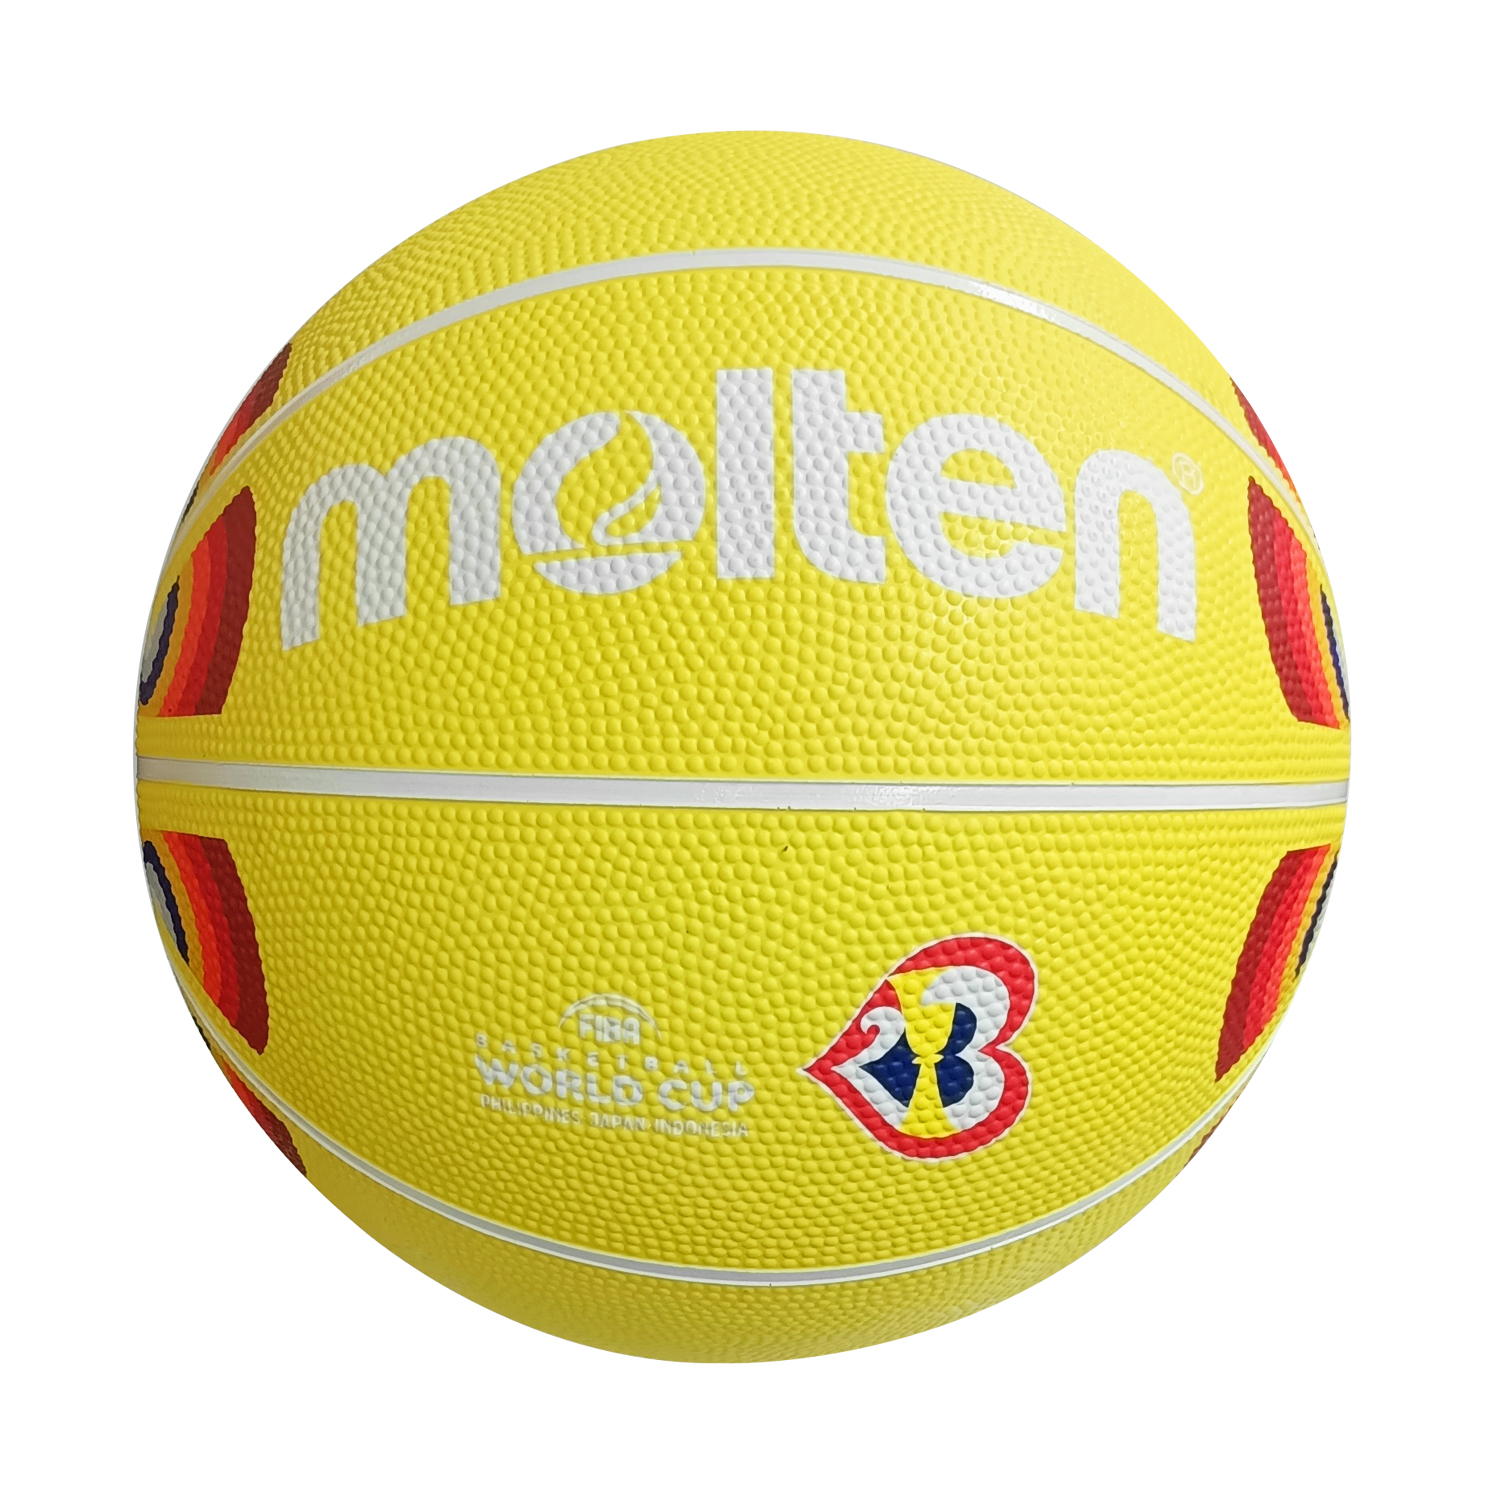 B7C1600 OFFICIAL BALL FOR FIBA WORLD CUP 2023, yellow, swatch